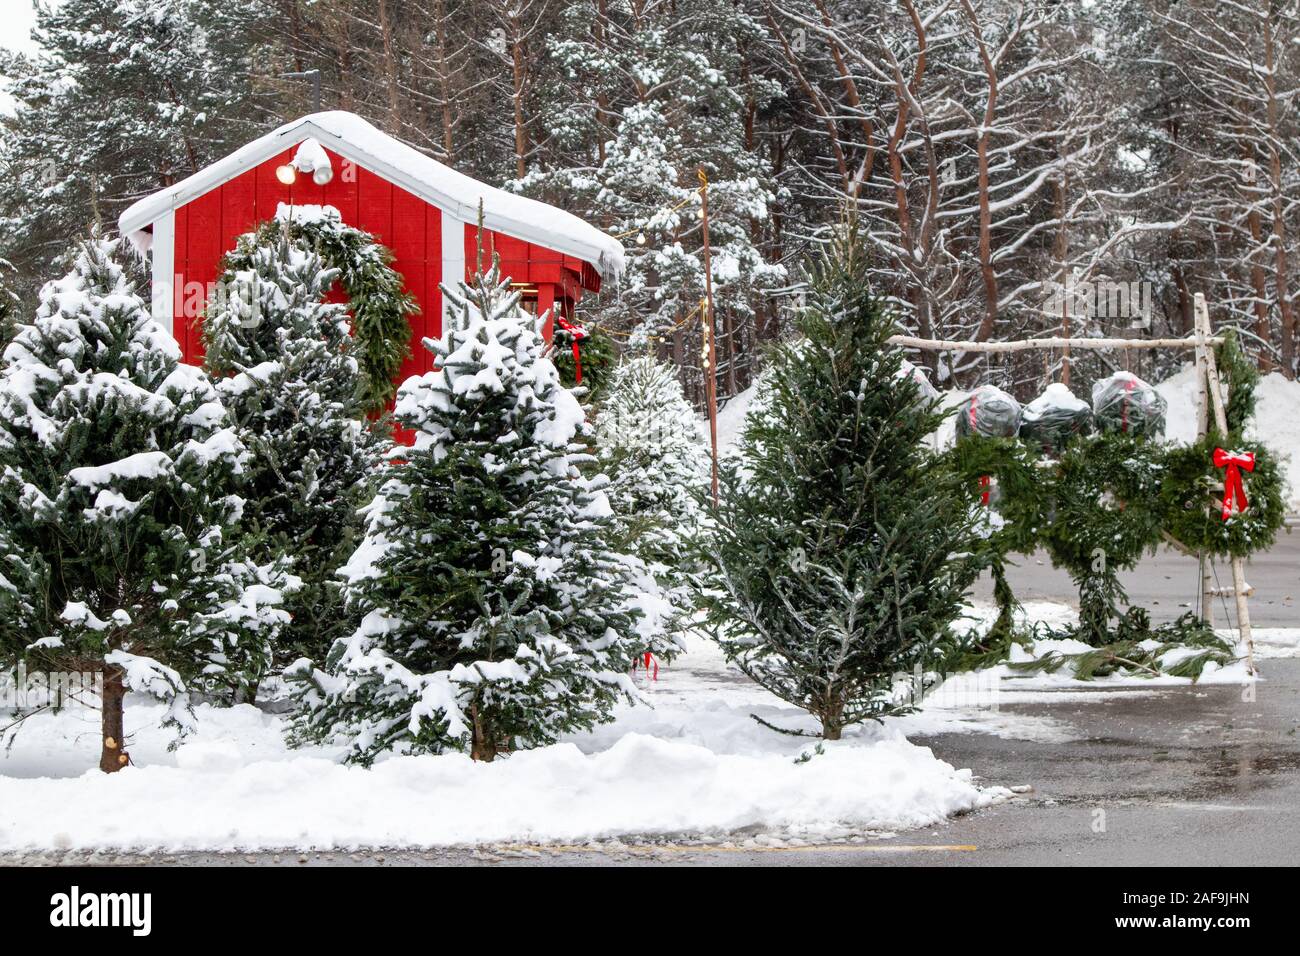 Christmas trees and wreaths being sold next to a red shack in Wisconsin just before Christmas Stock Photo